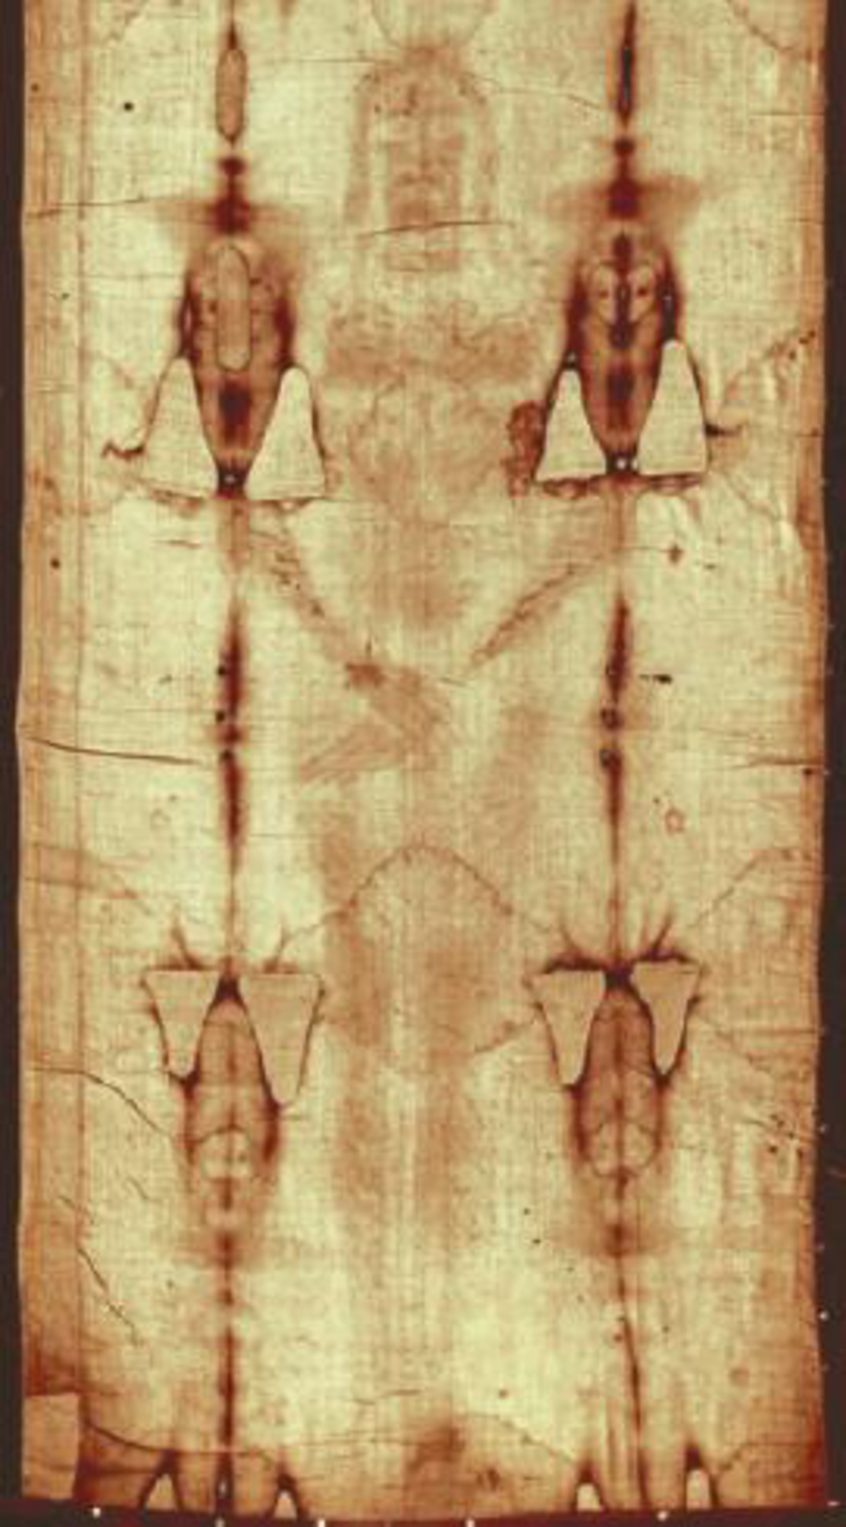 Chapter 3.1, Problem 12E, The Shroud of Turin, which shows the negative image of the body of a man who appears to have been 